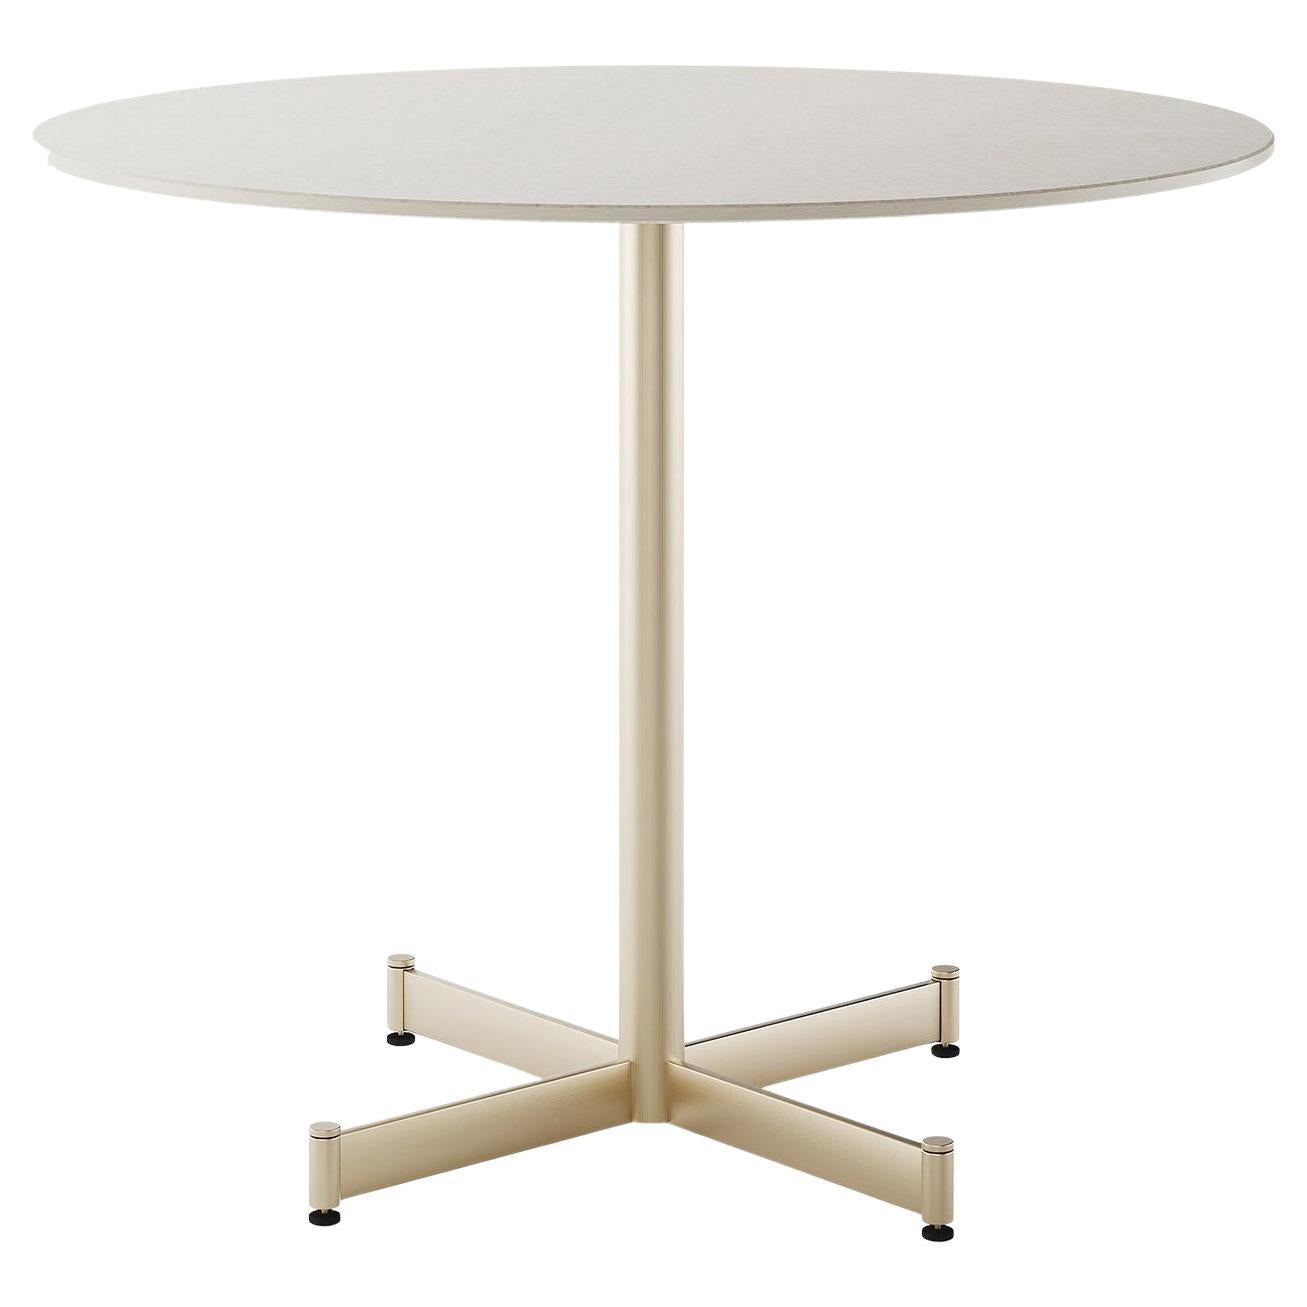 Grande table basse ronde blanche et champagne Fly